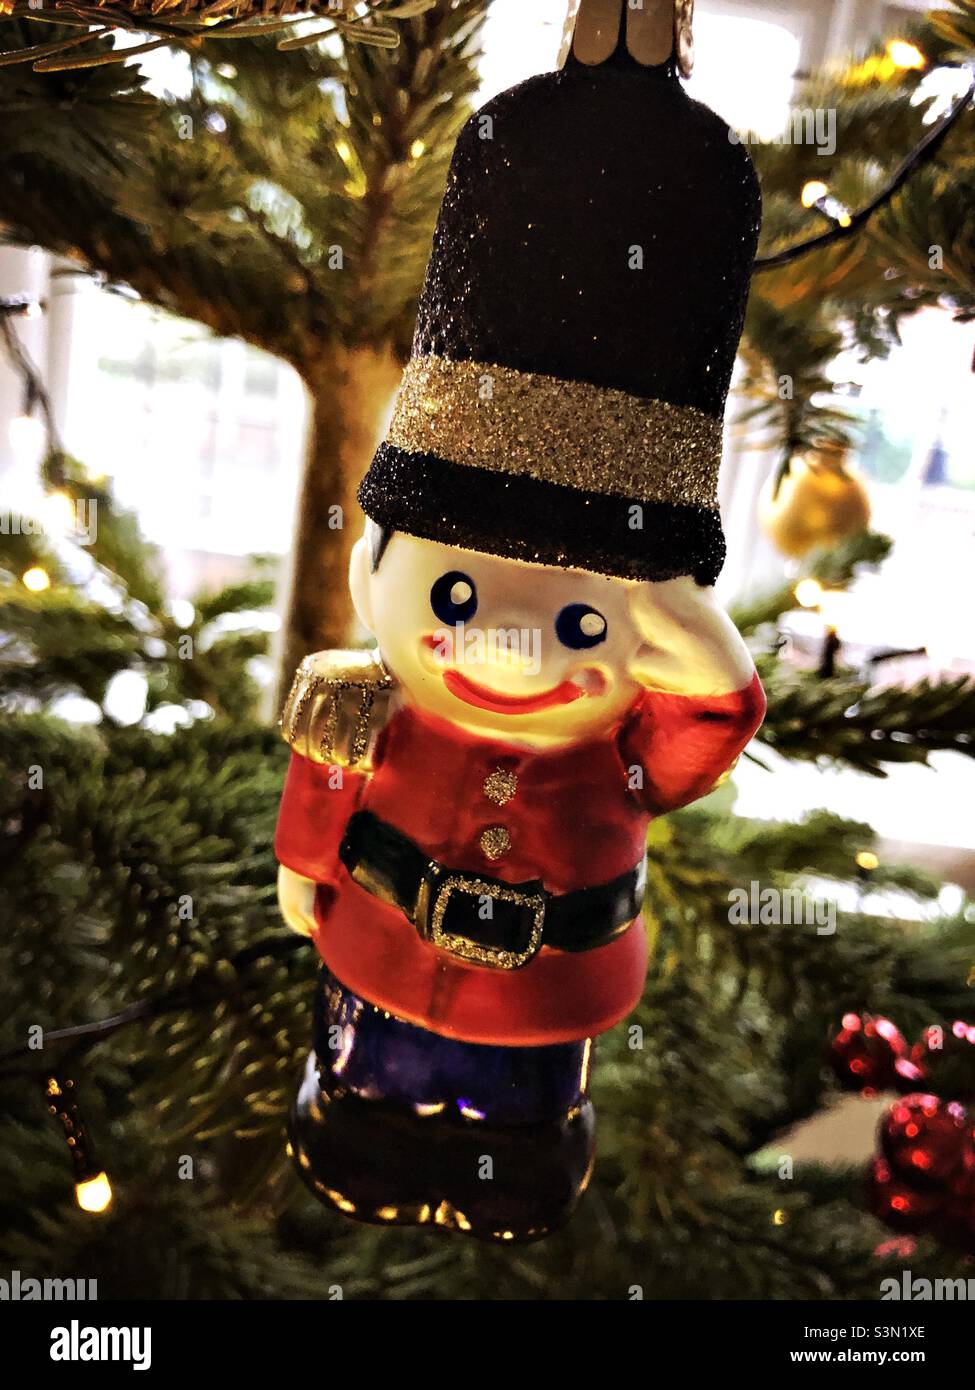 Toy soldier decoration on a Christmas tree, United Kingdom Stock Photo